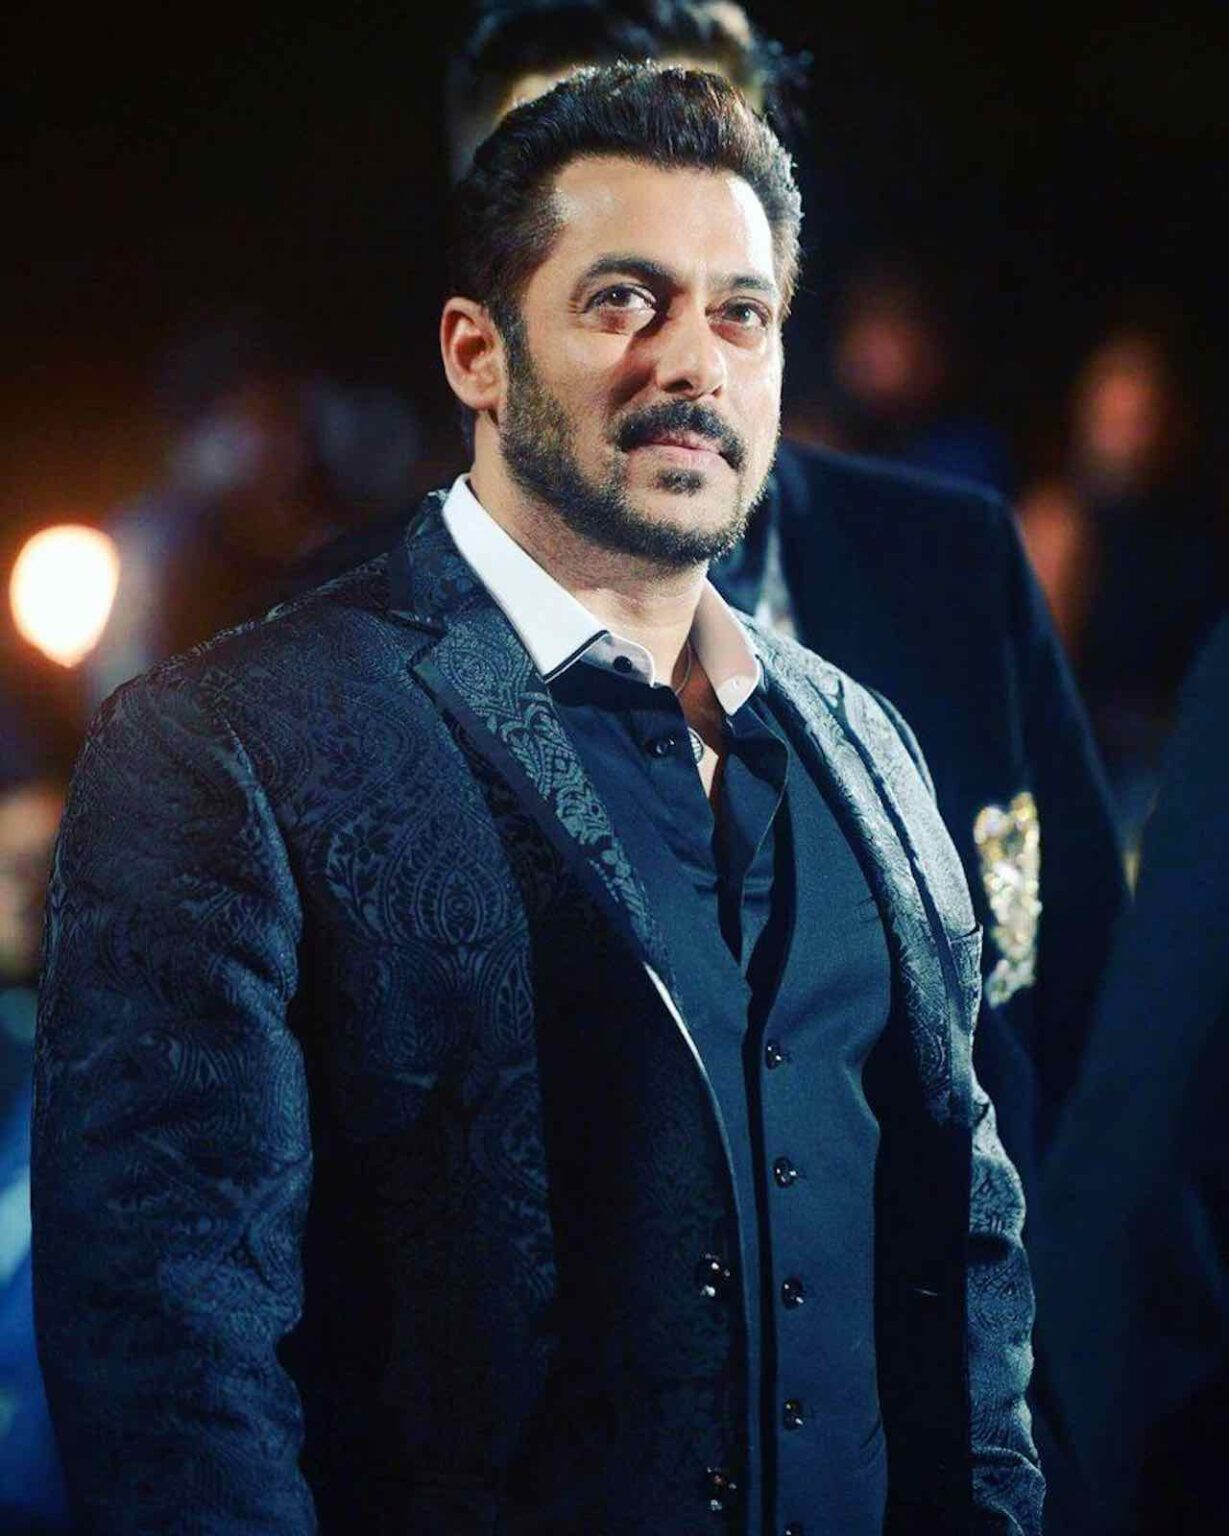 Abdul Rashid Salim Salman Khan is one of the most popular celebrities in both Bollywood and the world. Here's what we know about the strange case.